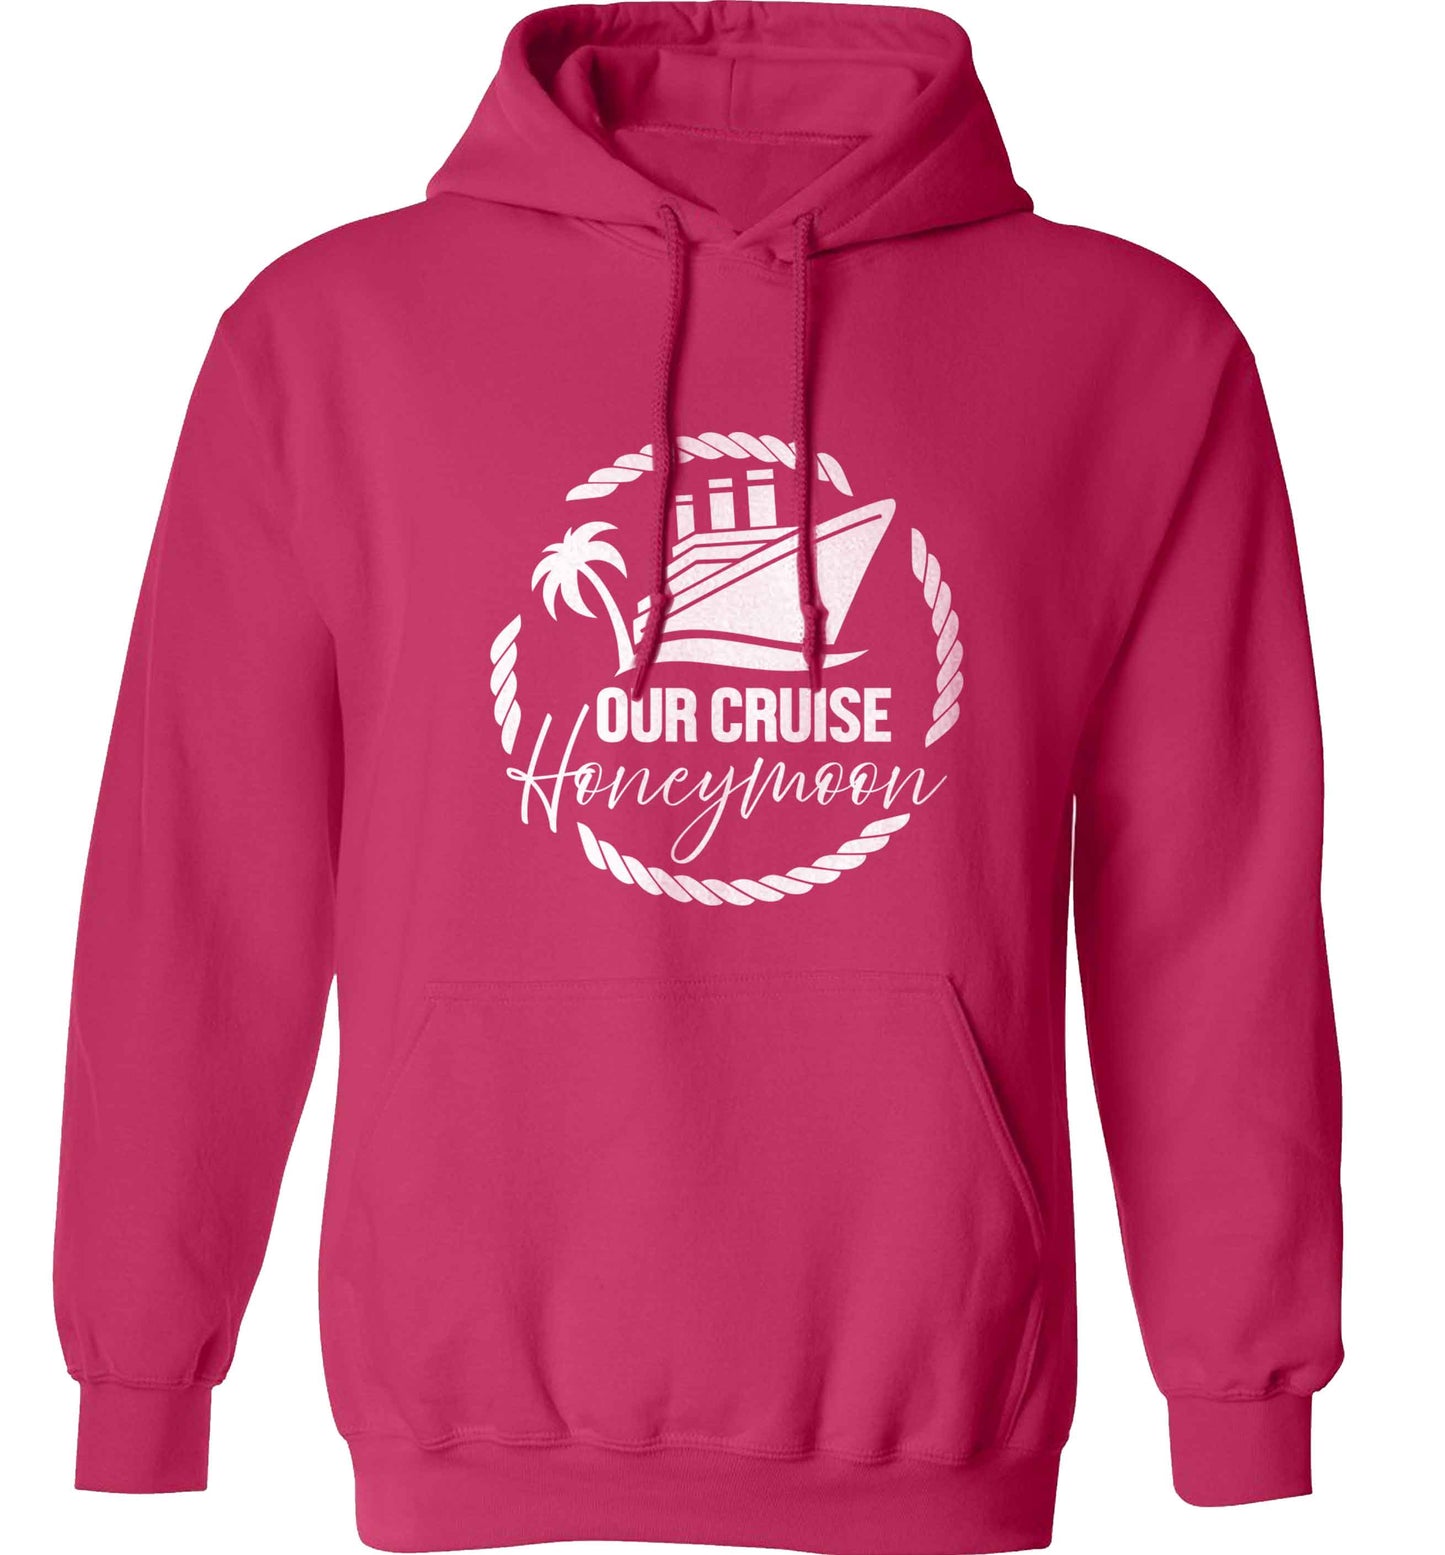 Our cruise honeymoon adults unisex pink hoodie 2XL